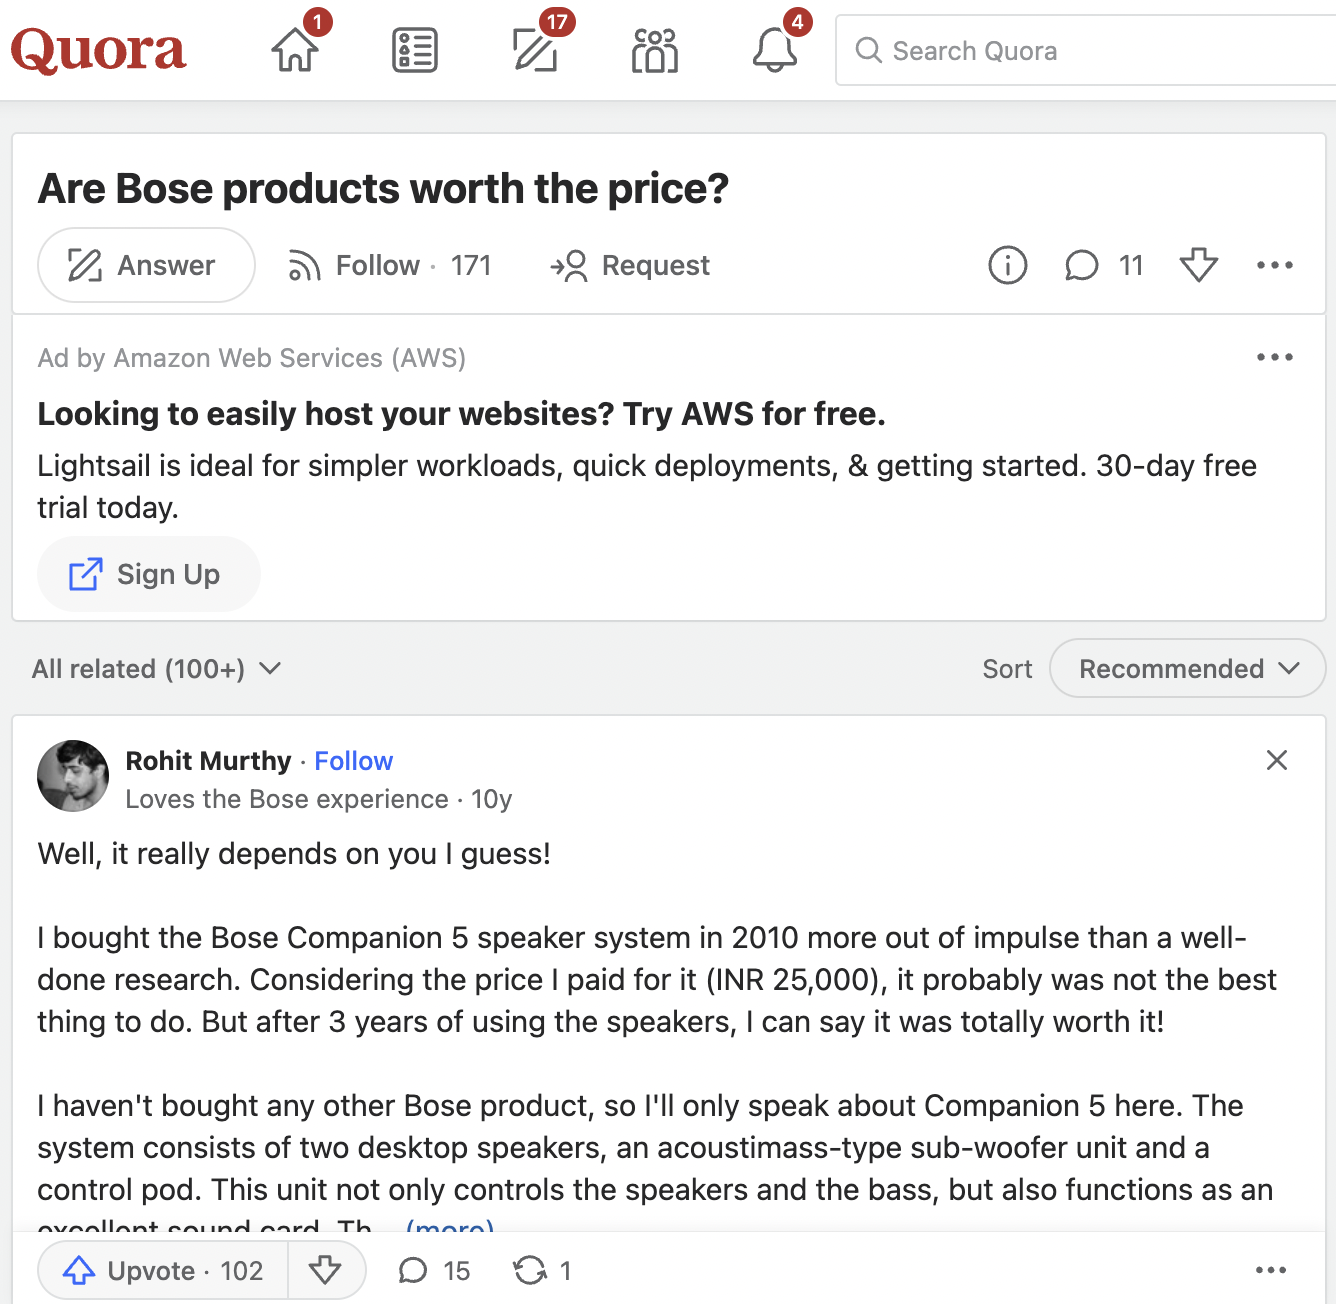 A customer enquiring about the quality and pricing of Bose products on Quora.